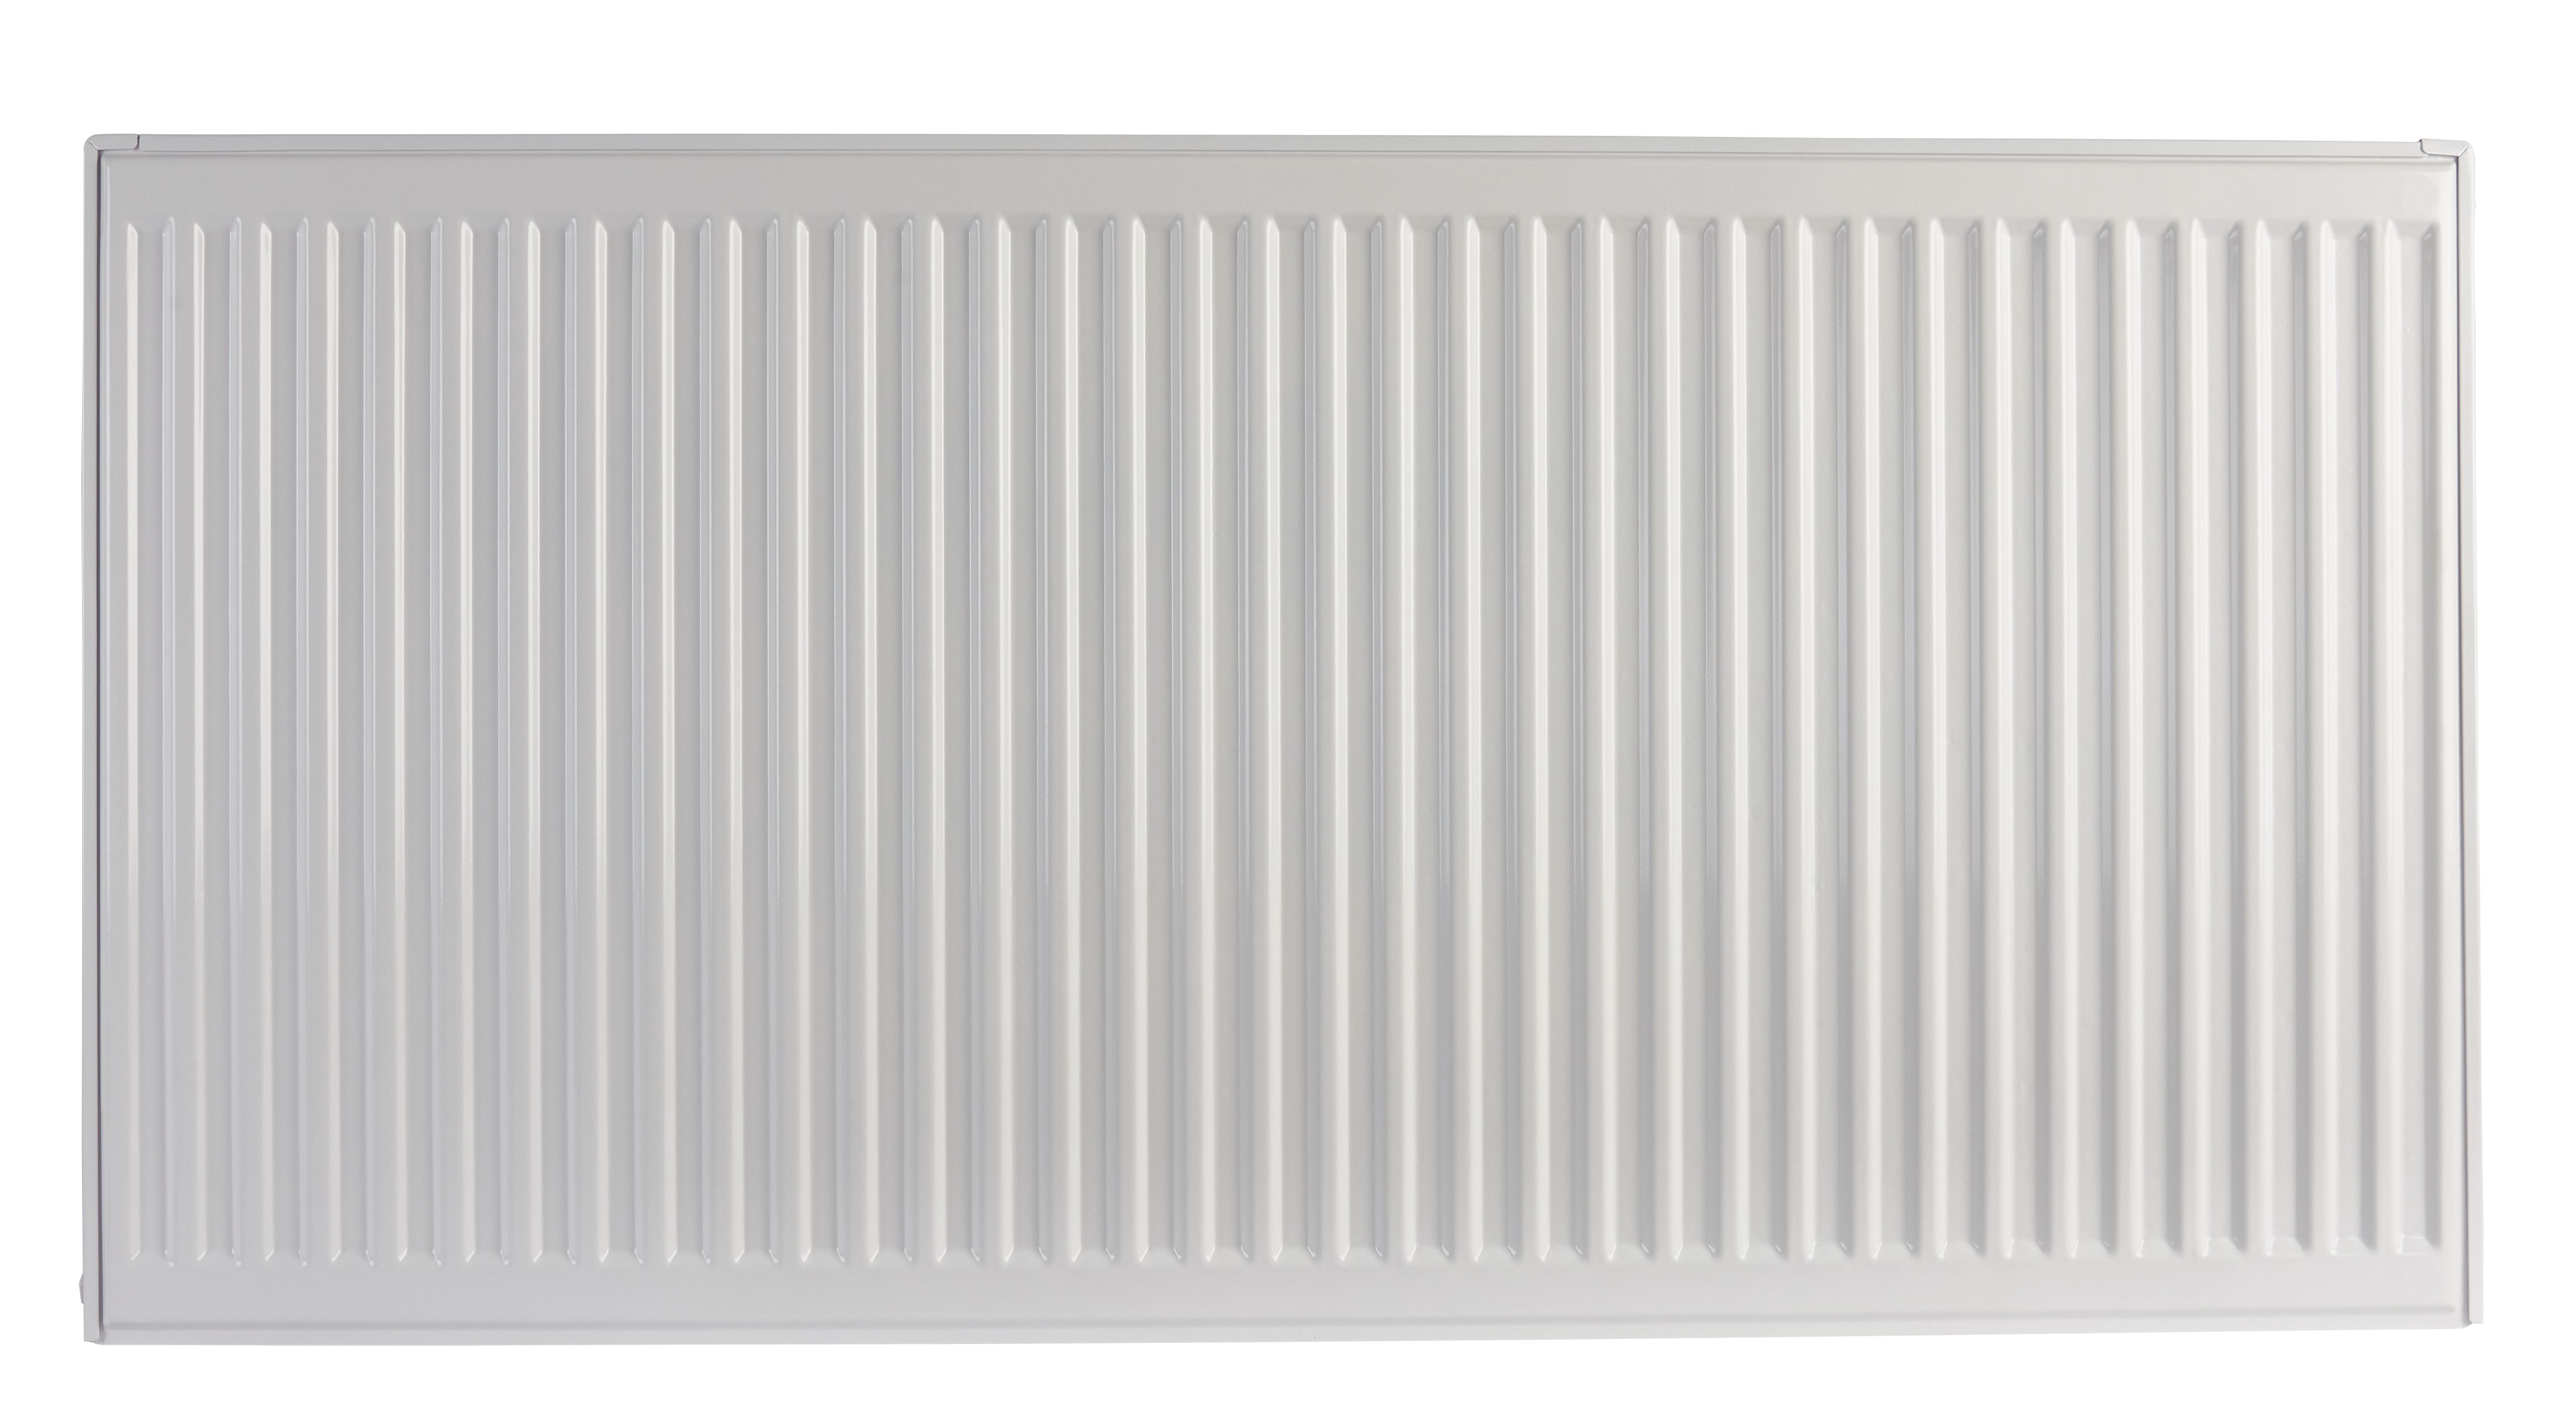 Image of Homeline by Stelrad 700 x 1000mm Type 21 Double Panel Plus Single Convector Radiator